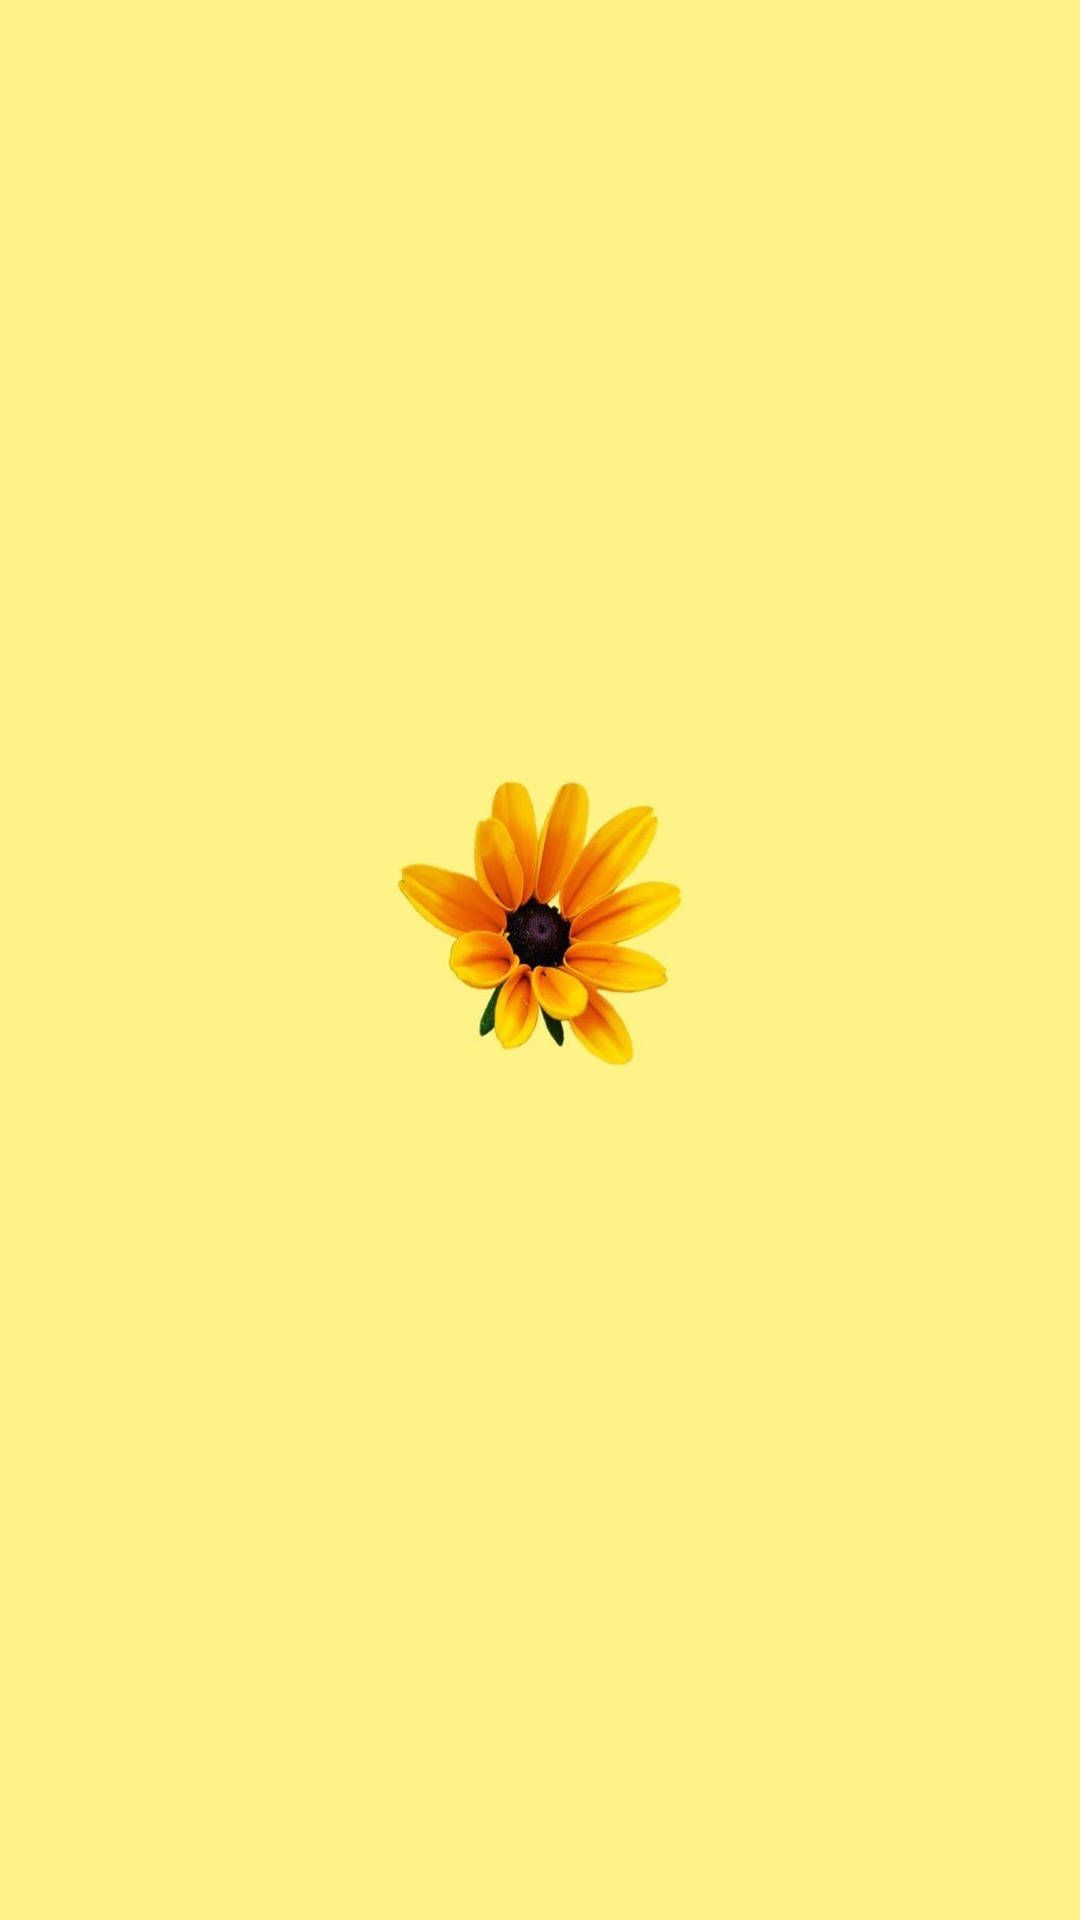 A yellow flower on a yellow background - Yellow